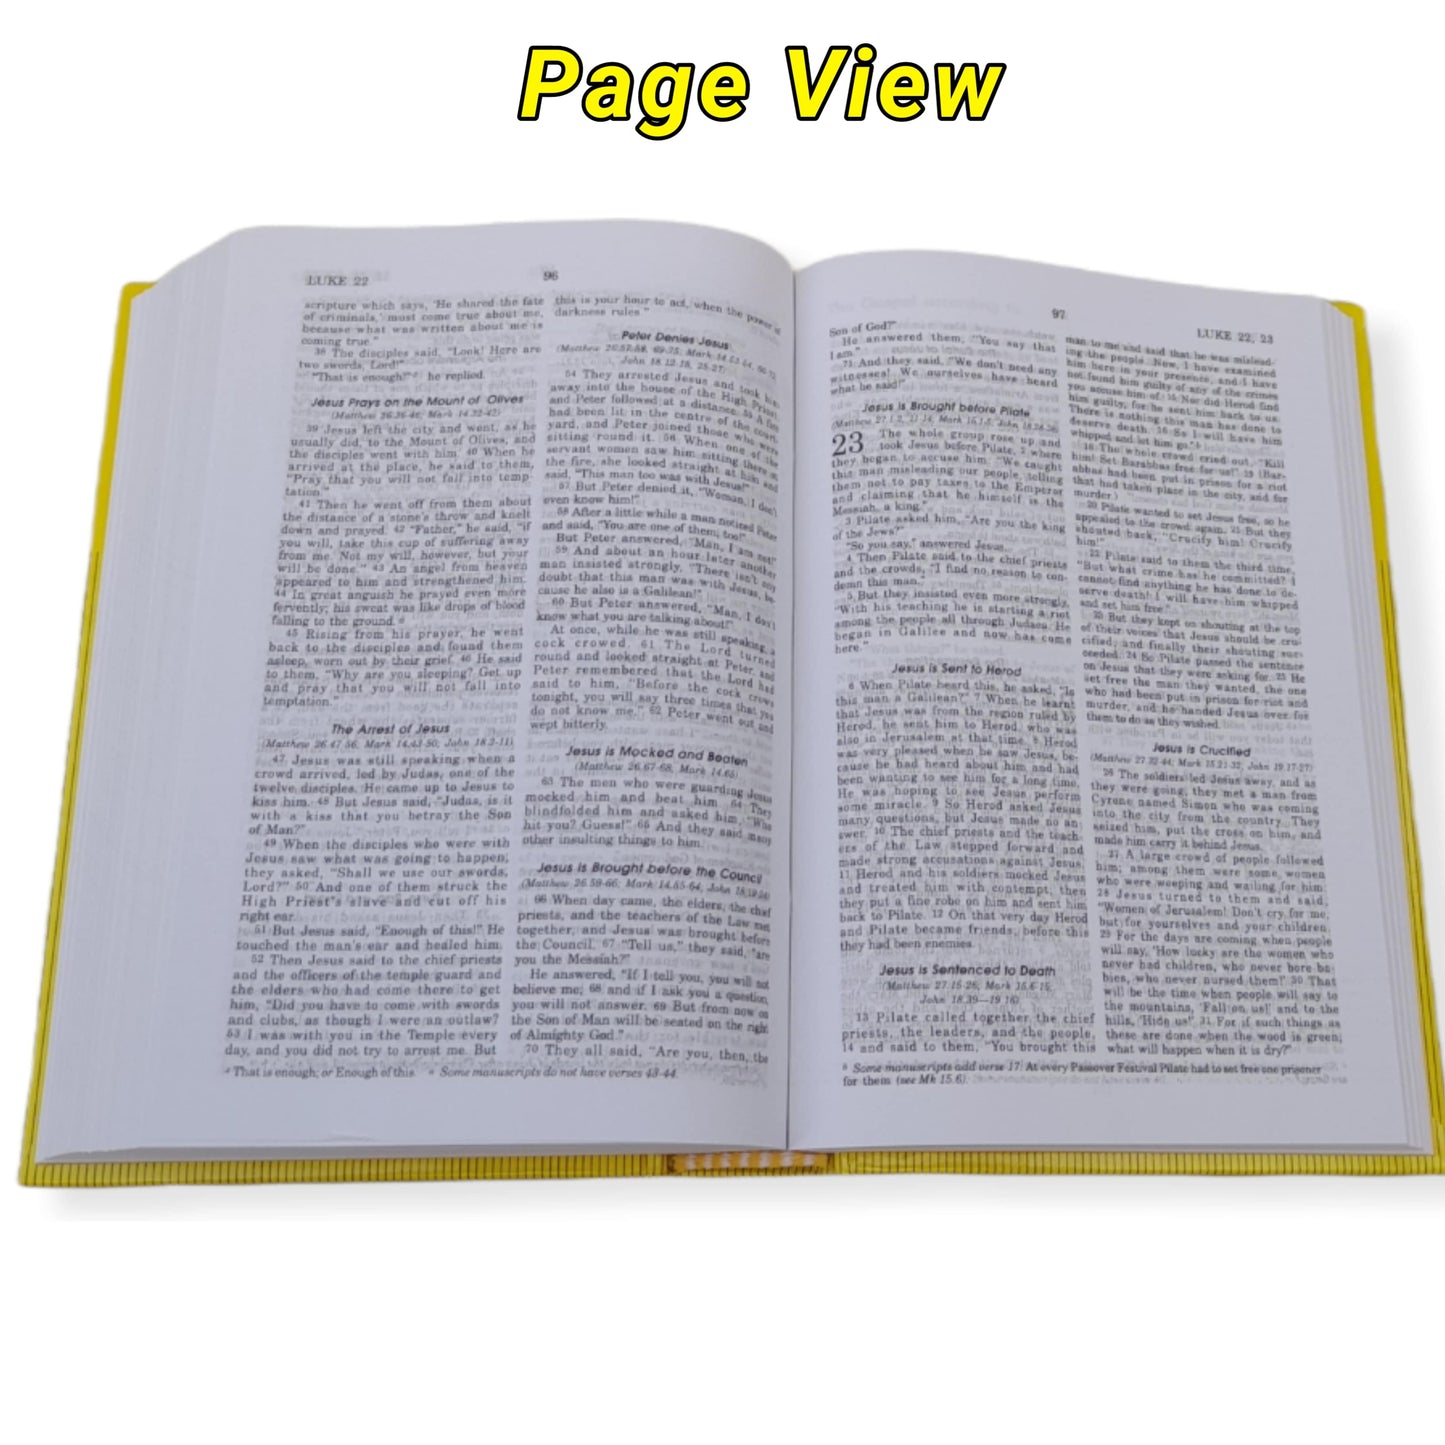 The Holy Bible Good News Edition Compact Edition Yellow Color ( Today's English Version )